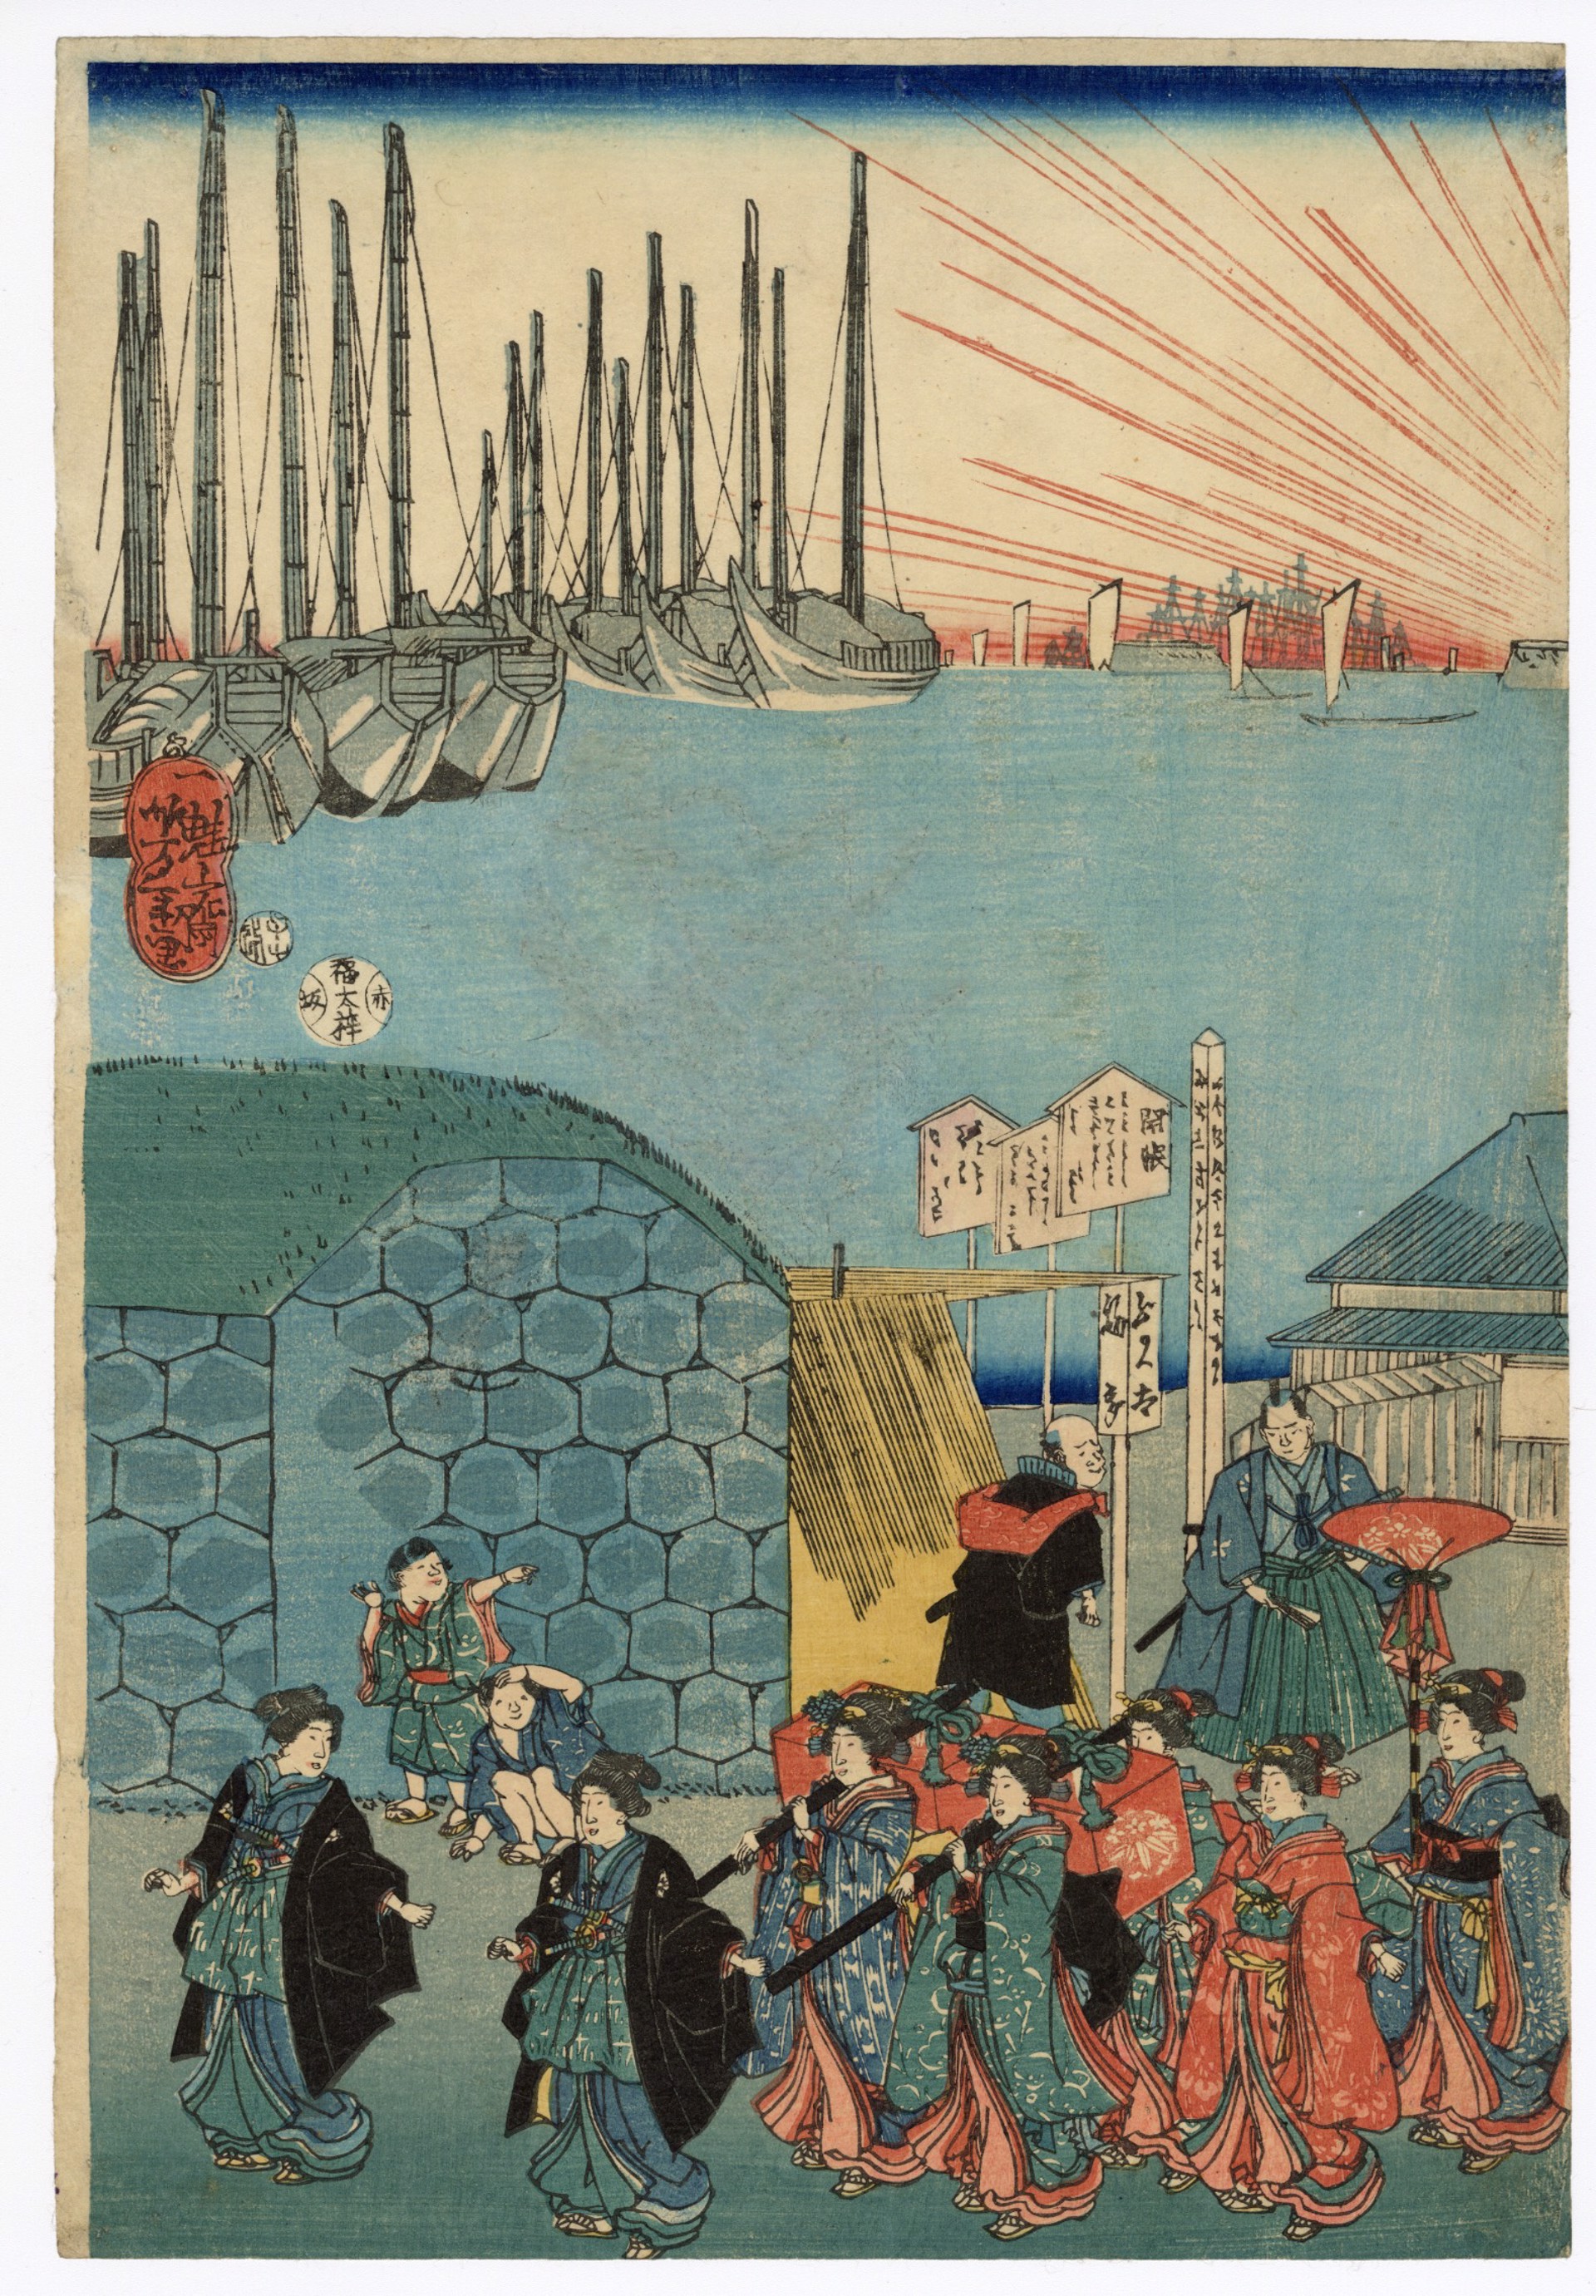 The Procession of a Princess: Morning View of Takanawa, a Famous Place in Edo by Yoshitoshi